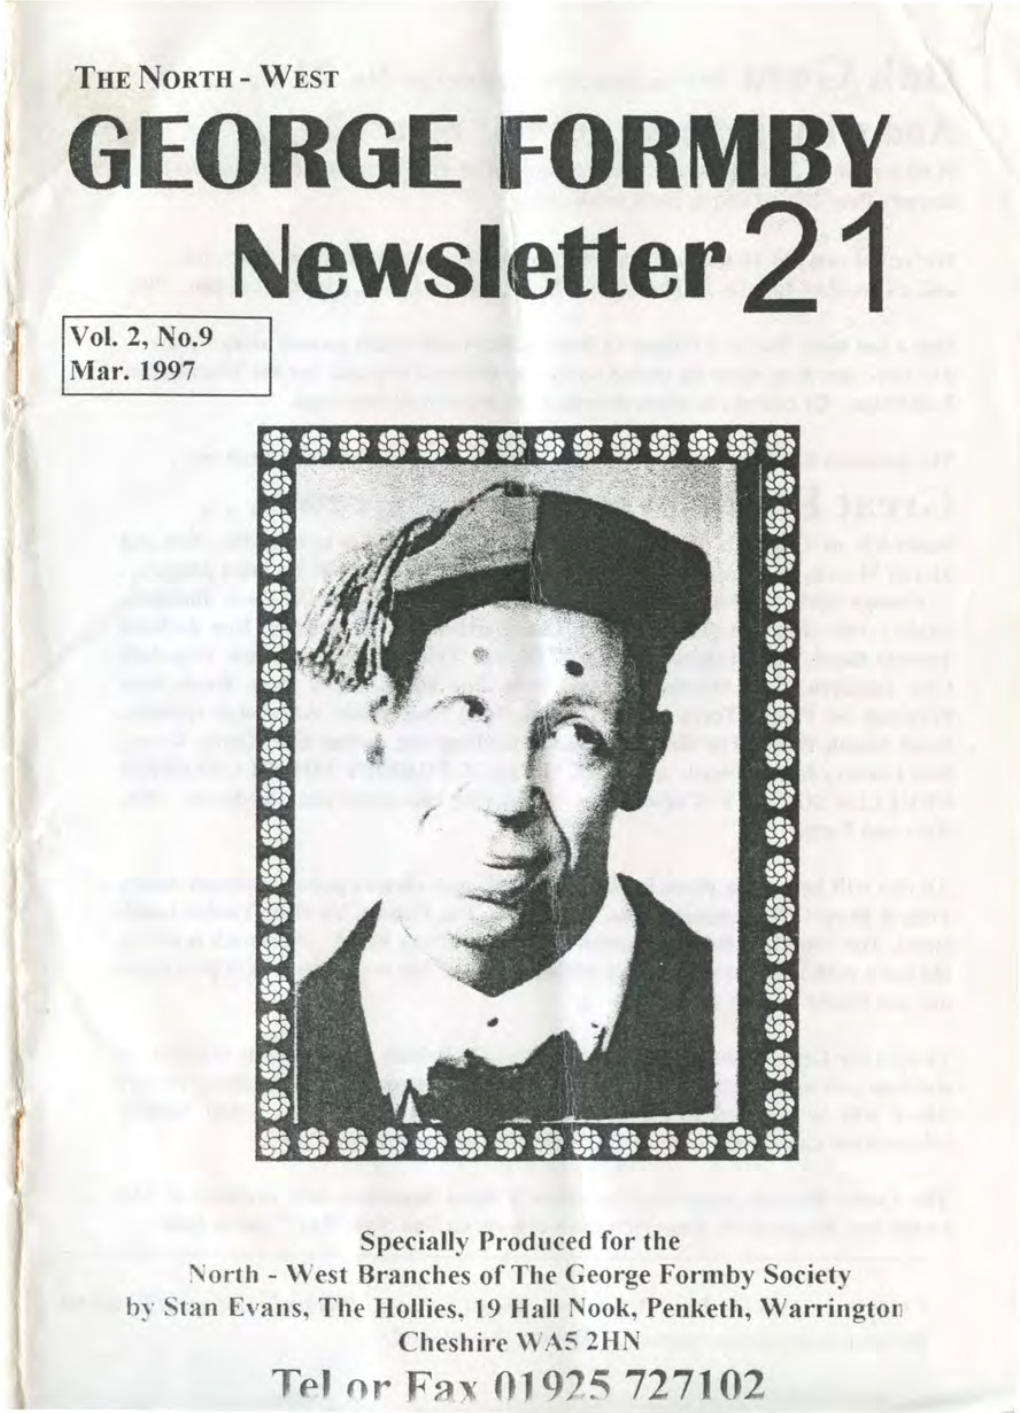 GEORGE FORMBY Newsletter R------, 21 Vol